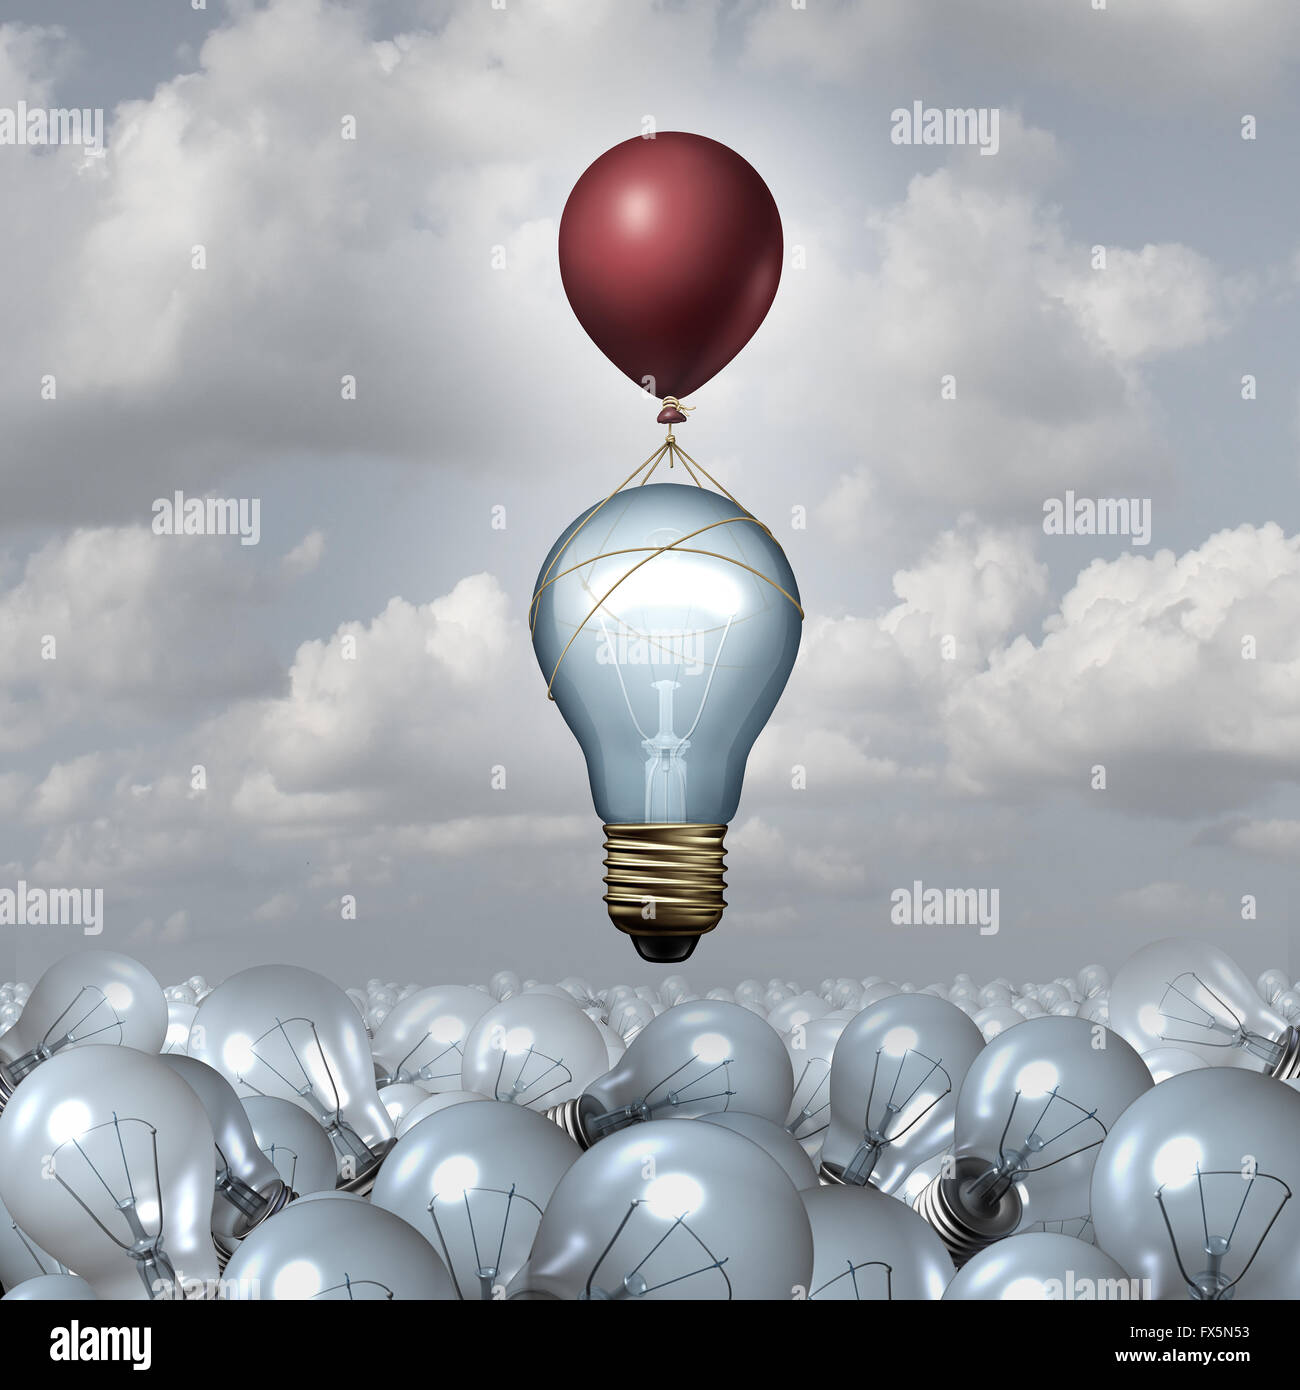 Innovative thinking concept as a group of 3D illustration light bulbs in a vast landscape as one lightbulb rises up with the help of a balloon as a motivation metaphor for creative innovation inspiration. Stock Photo